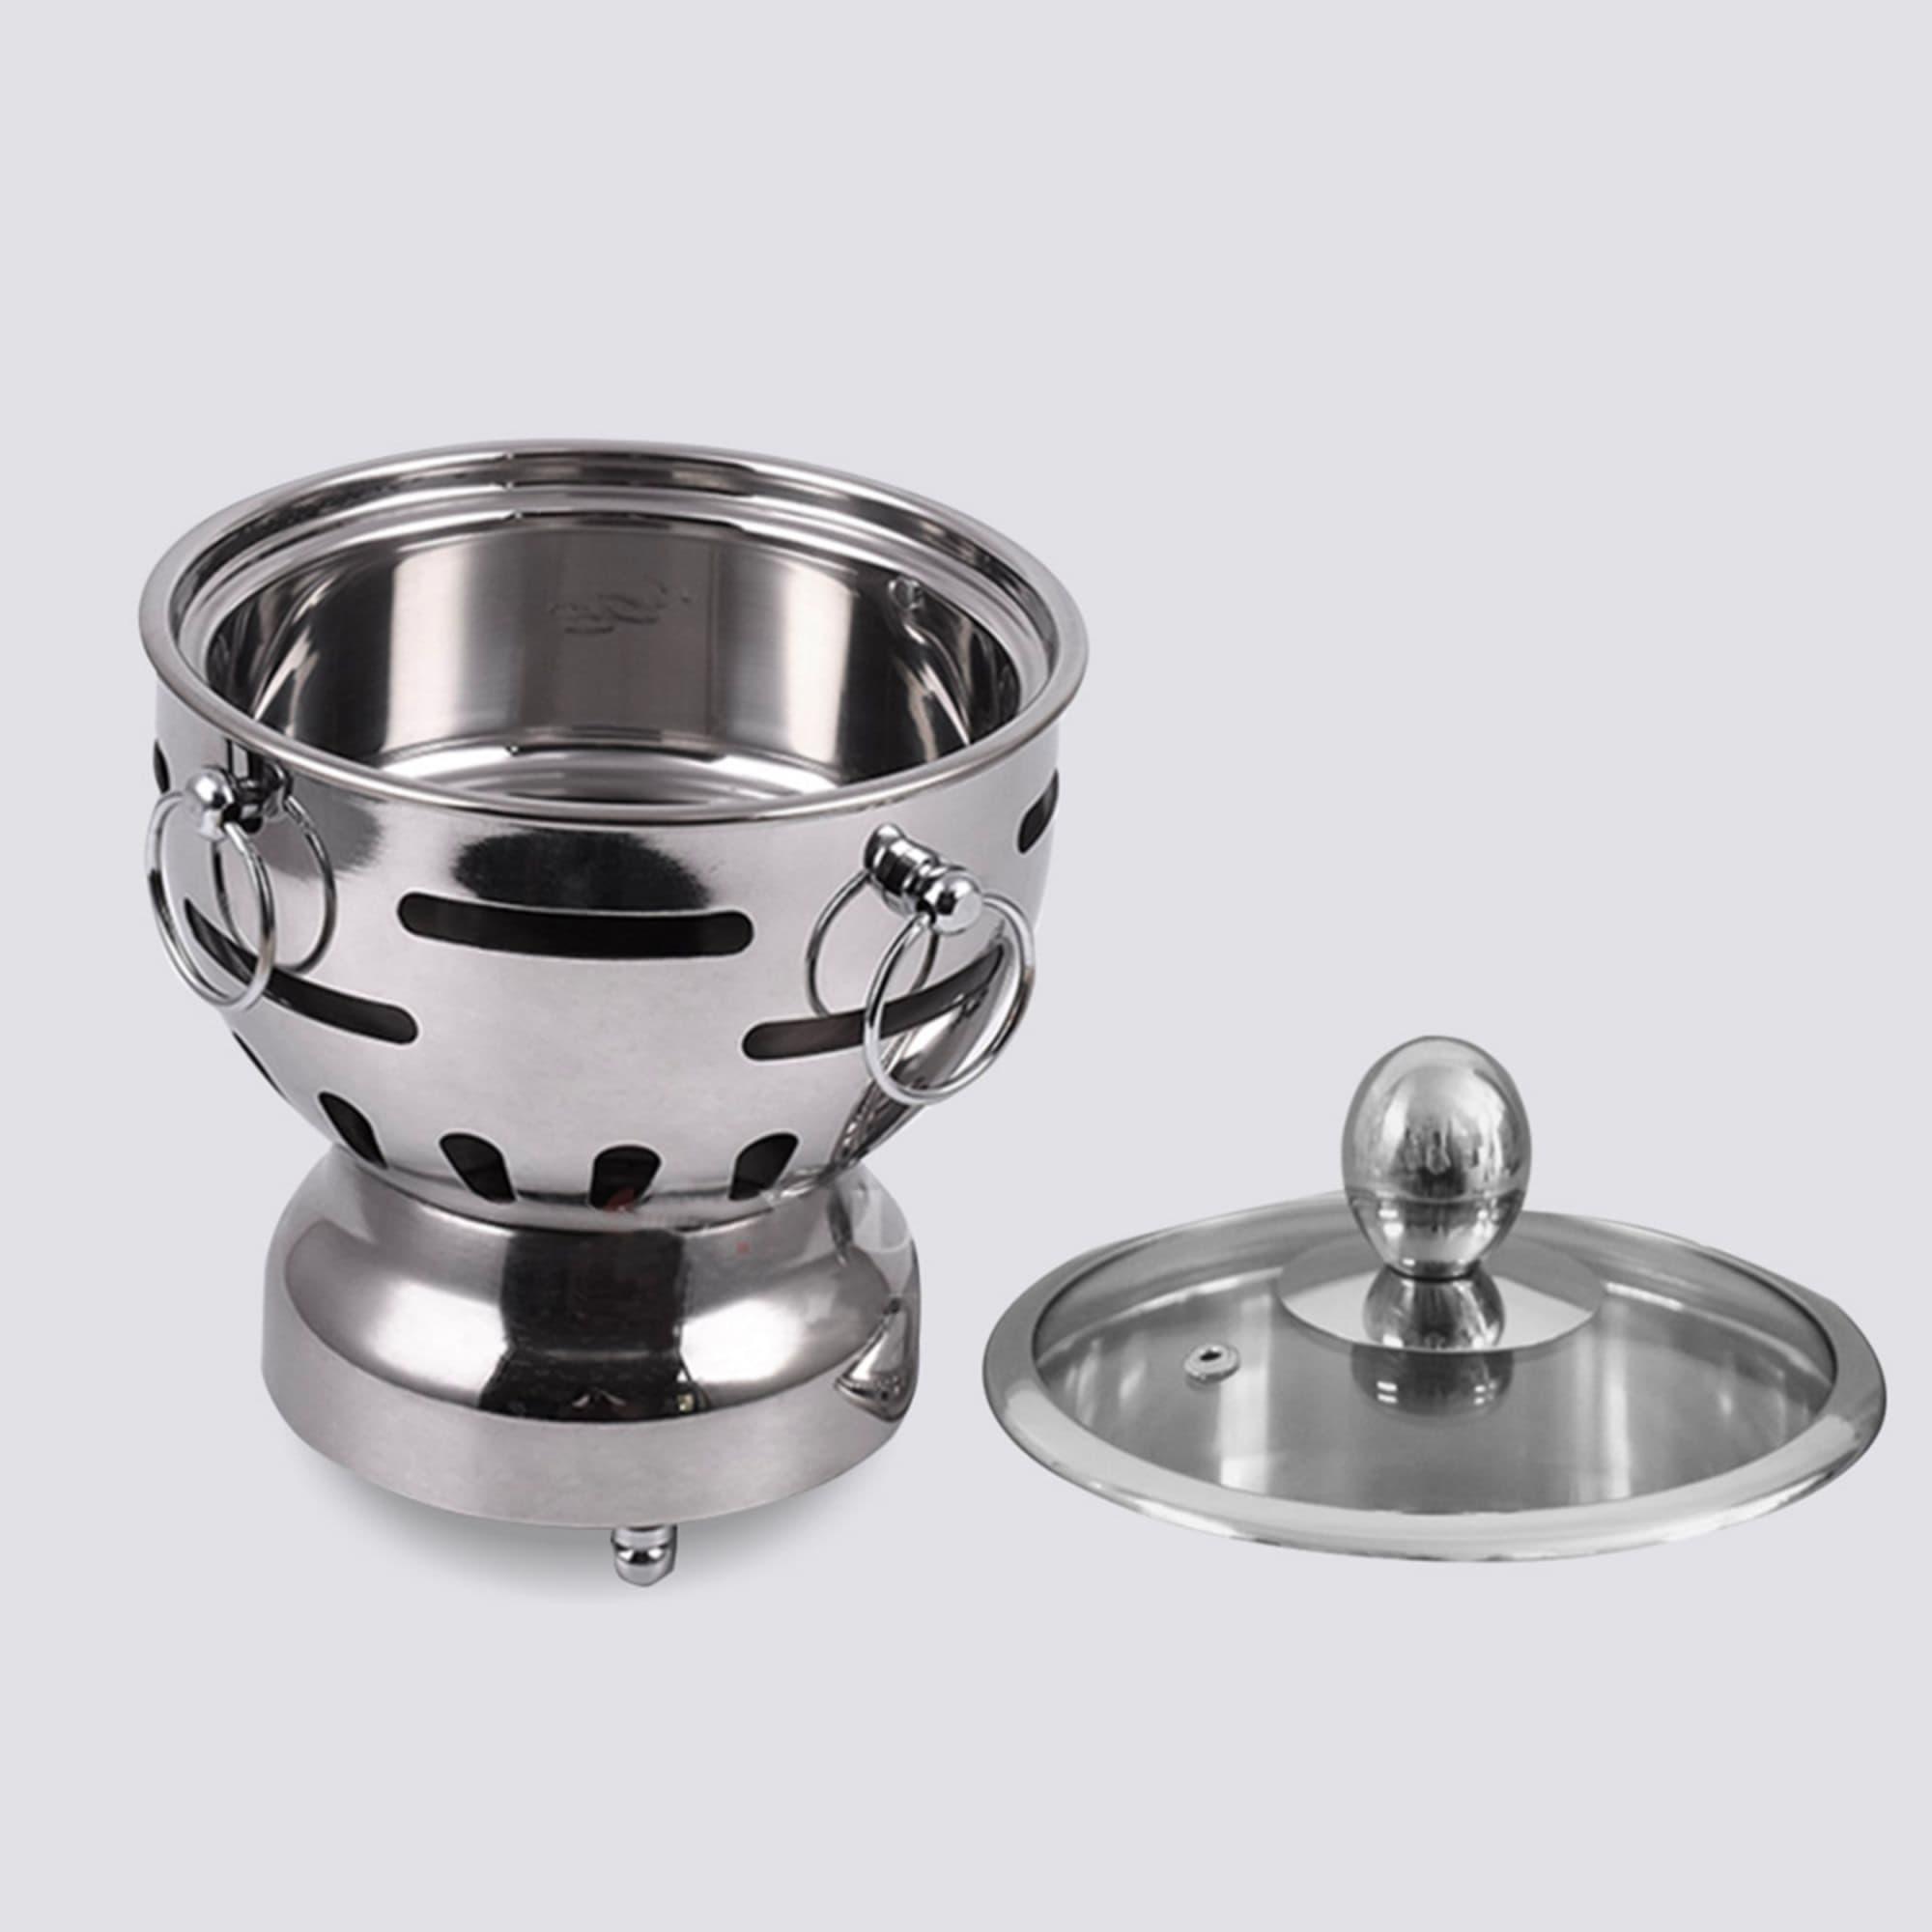 Soga Round Stainless Steel Single Hot Pot with Glass Lid 18.5cm Set of 4 Image 6